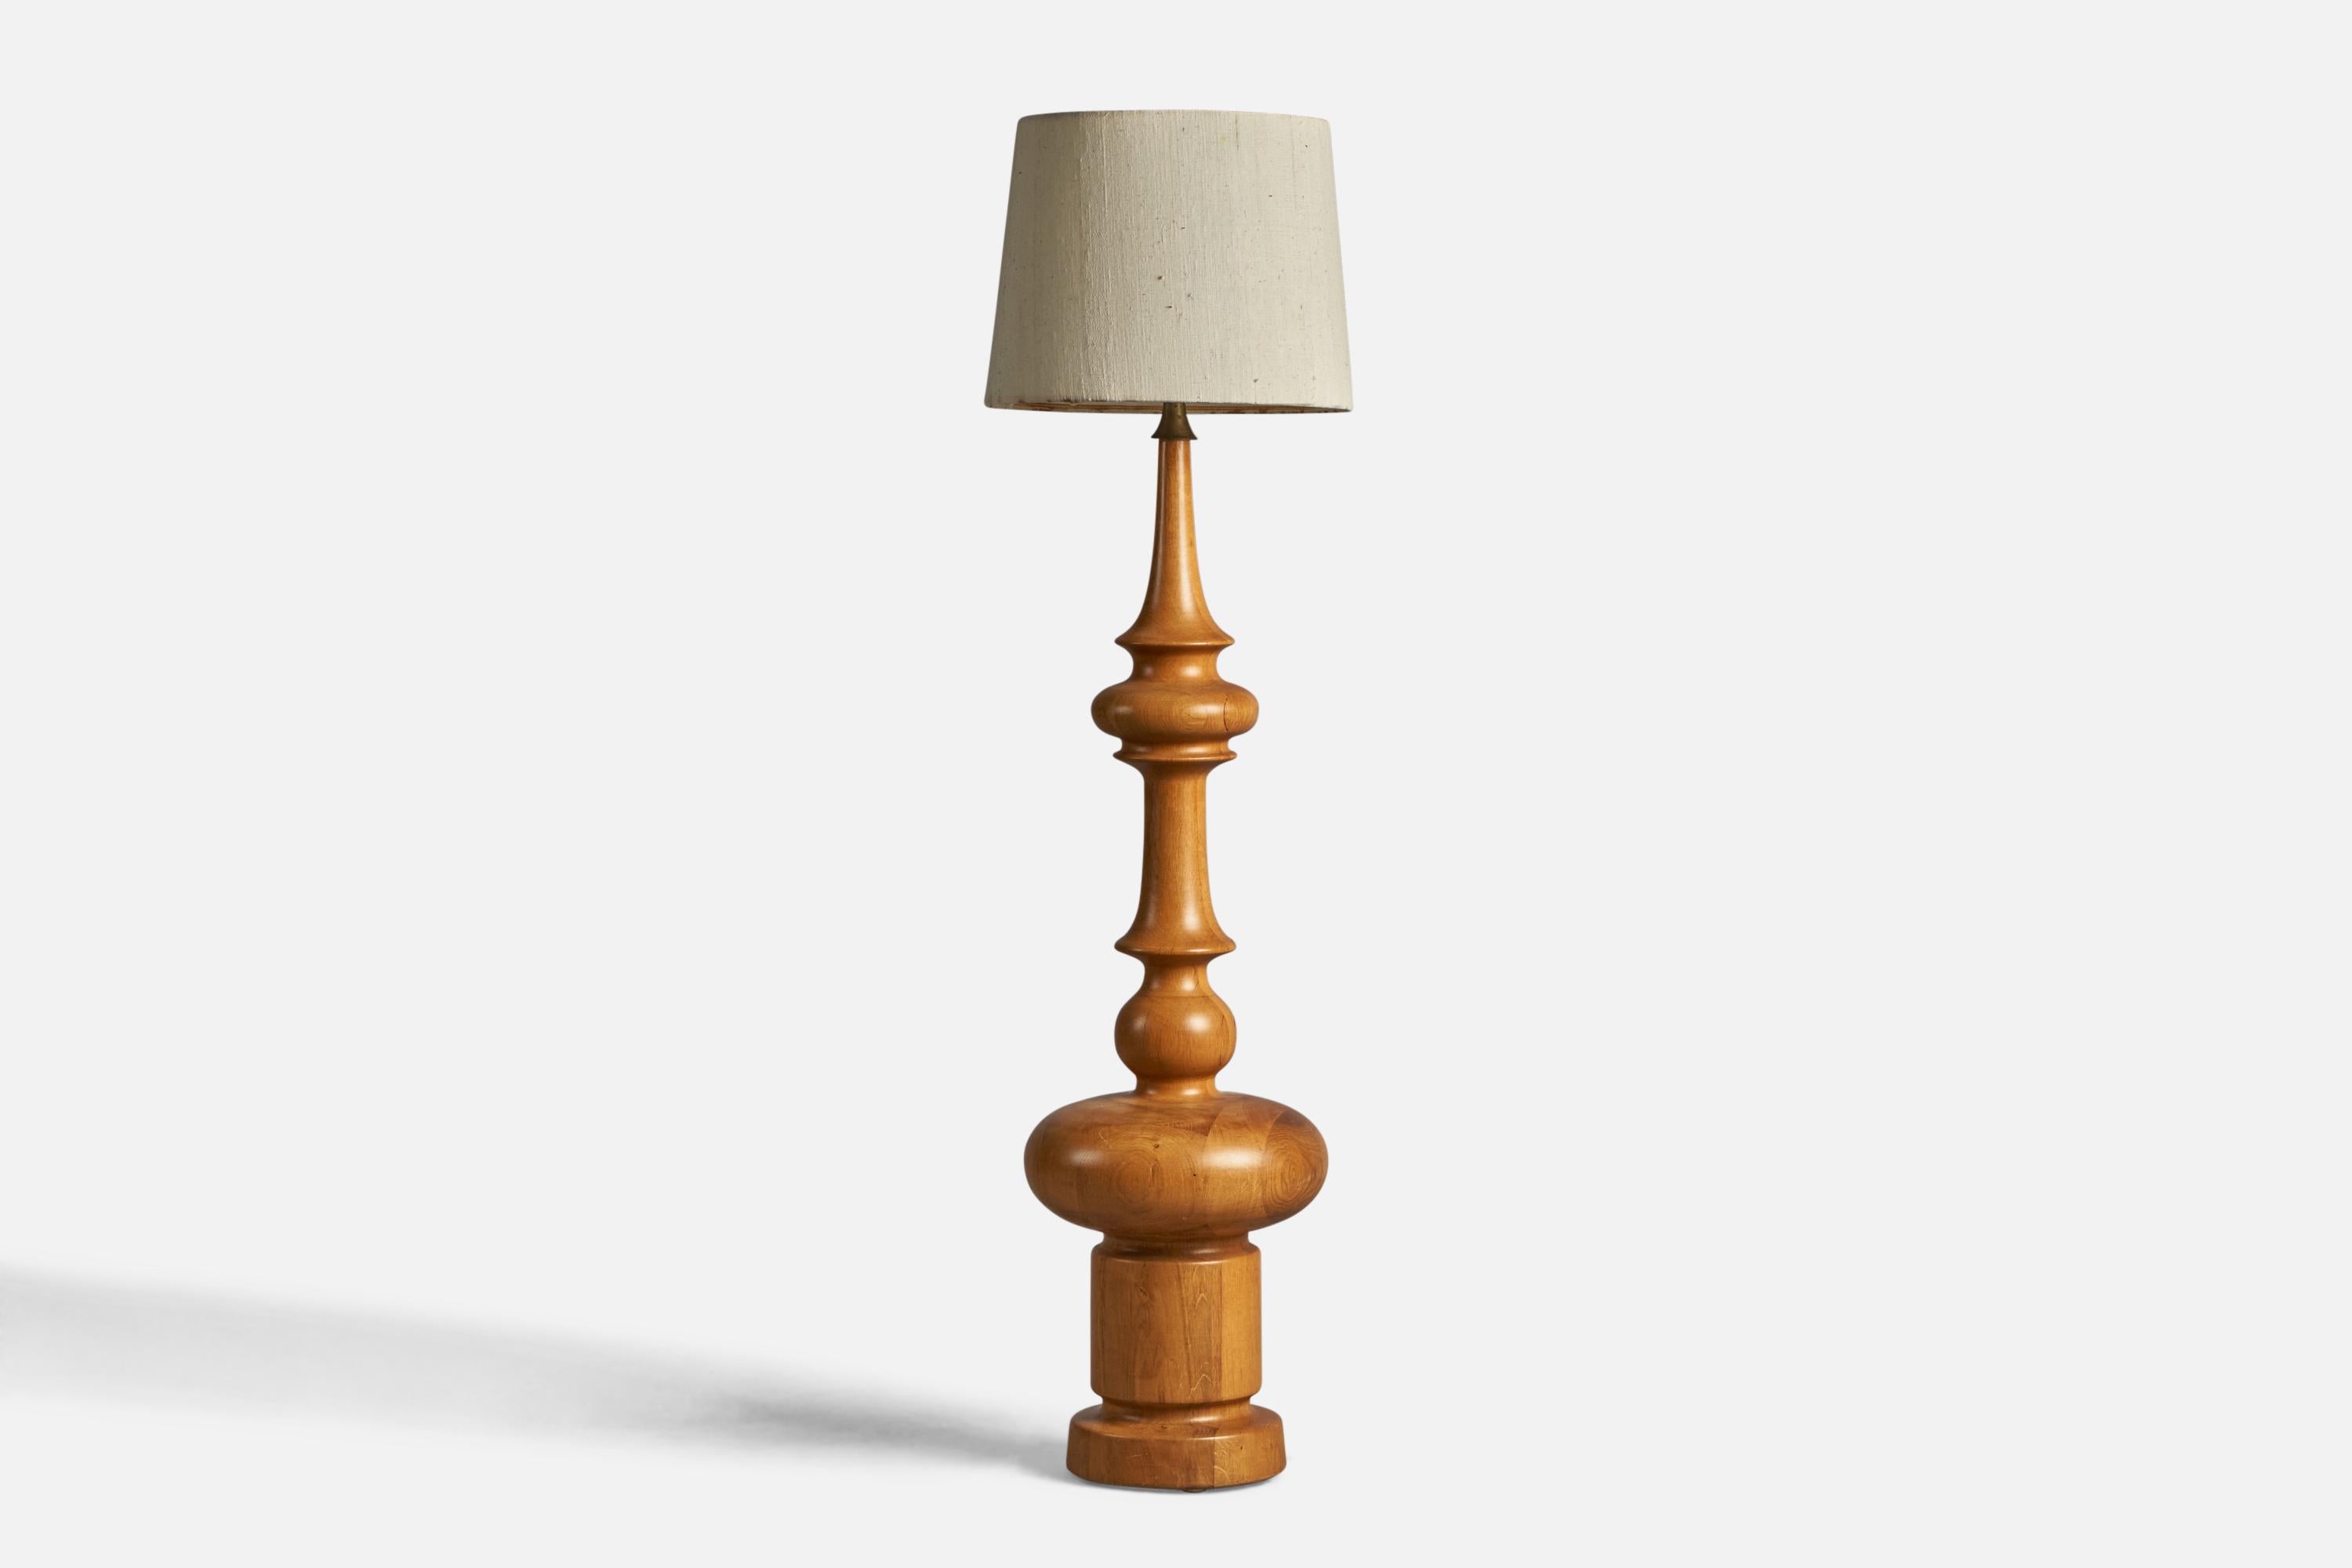 An oak, brass and woven beige fabric floor lamp designed and produced in Denmark, c. 1950s.

Overall Dimensions (inches): 55.5” H x 15” Diameter
Bulb Specifications: E-26 Bulb
Number of Sockets: 1